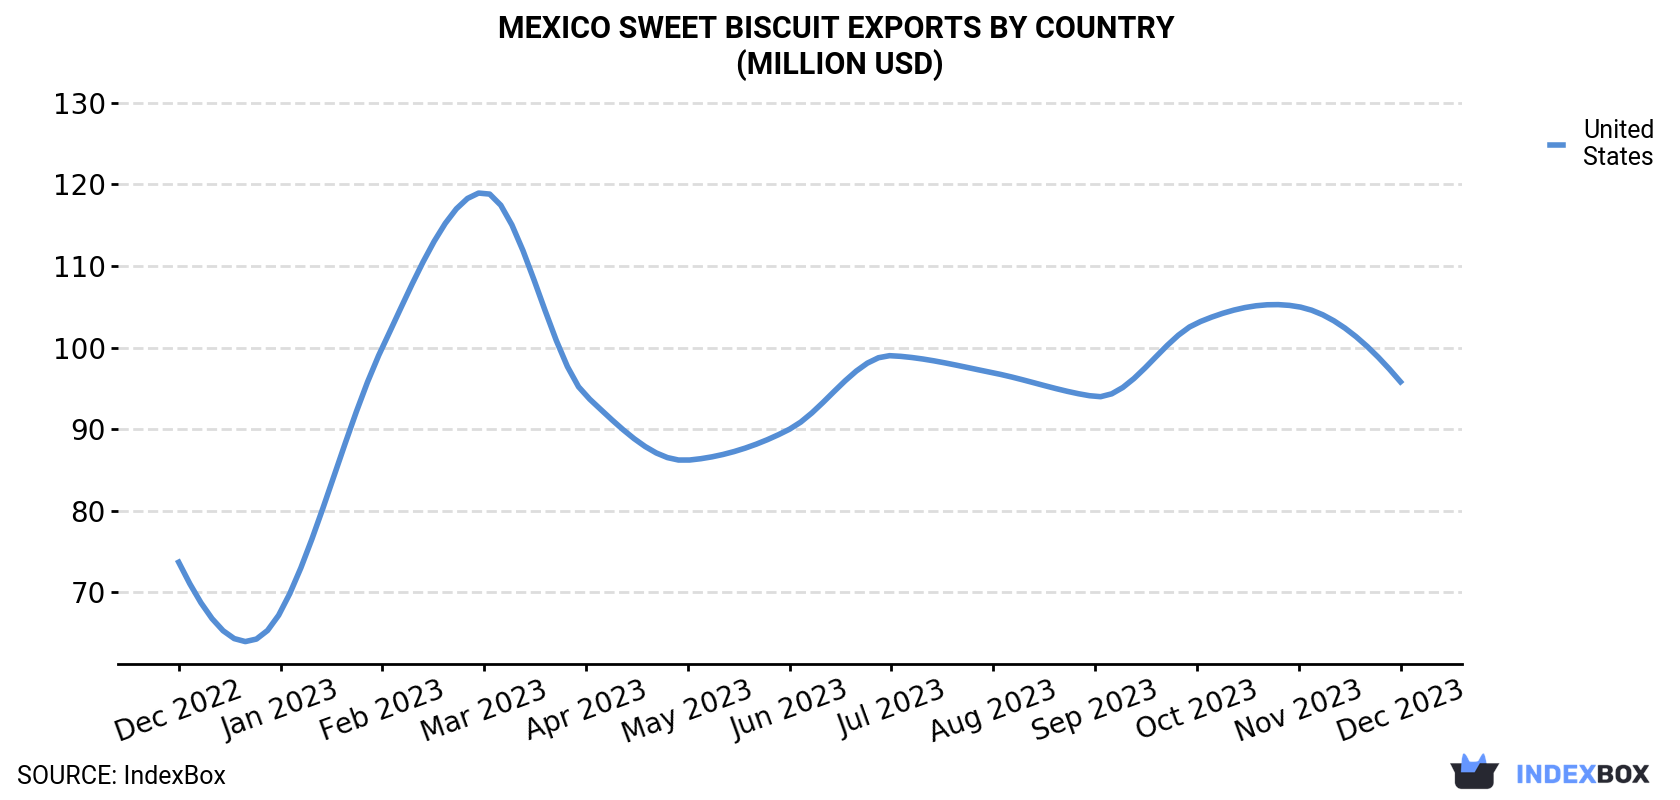 Mexico Sweet Biscuit Exports By Country (Million USD)